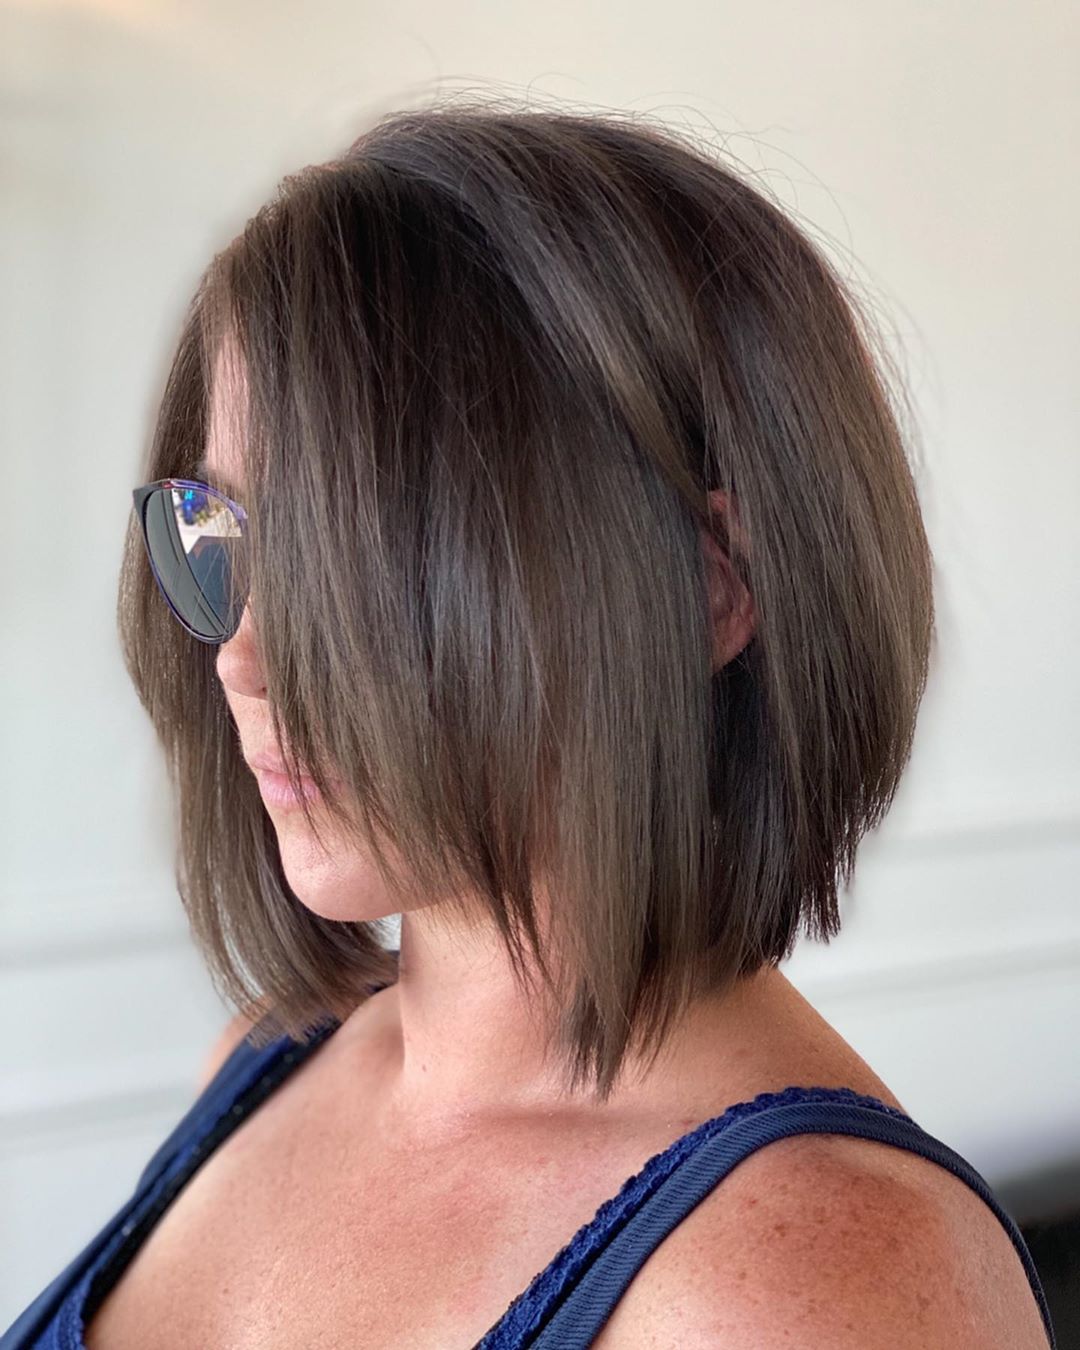 53 Awesome Short Layered Haircuts for Older Women (Updated 2022) 35d009b97a96b5b7c2f2c3395c777c7e